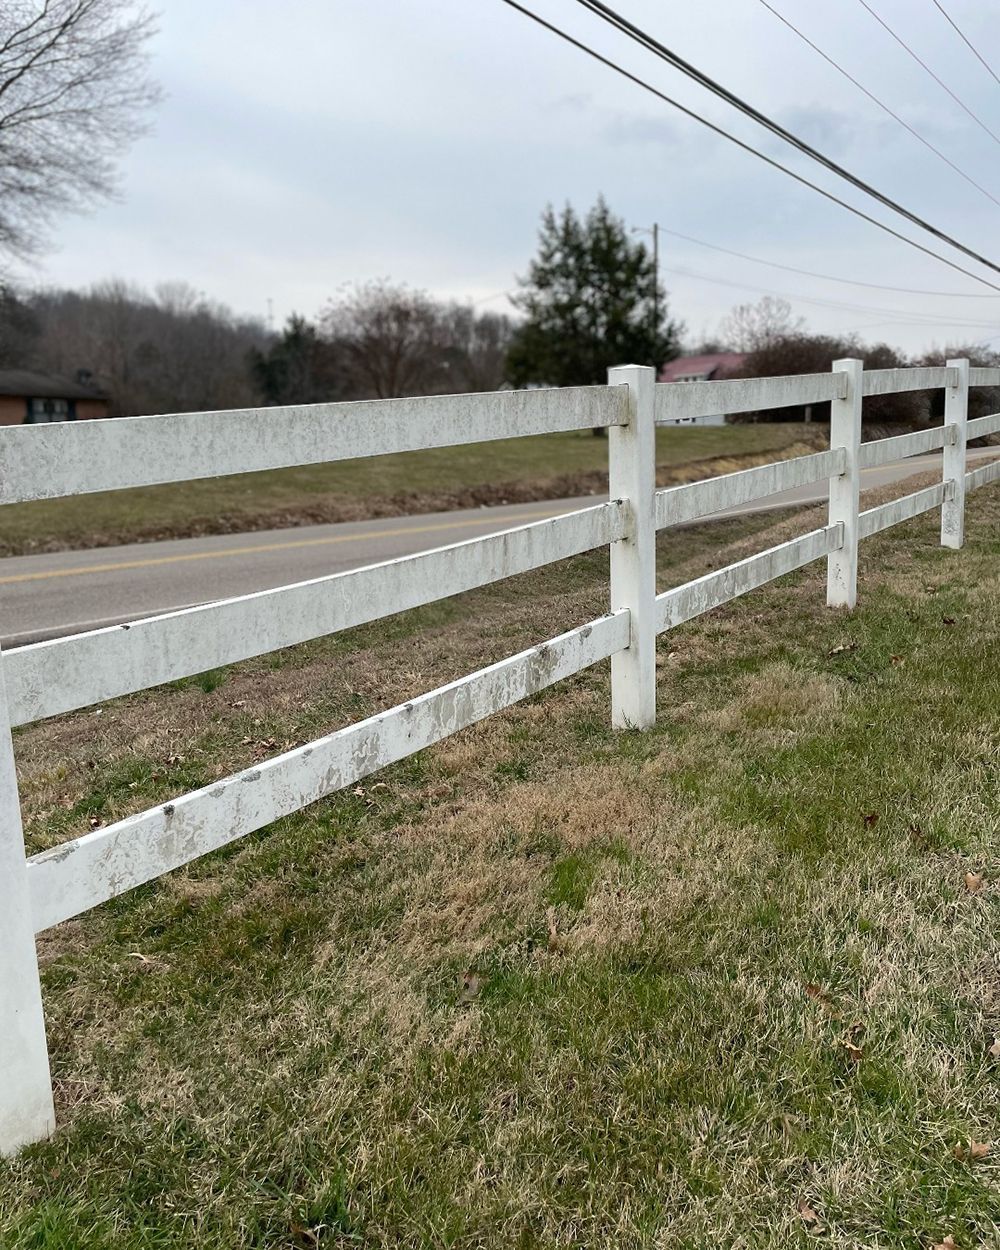 A white fence surrounds a grassy field next to a road